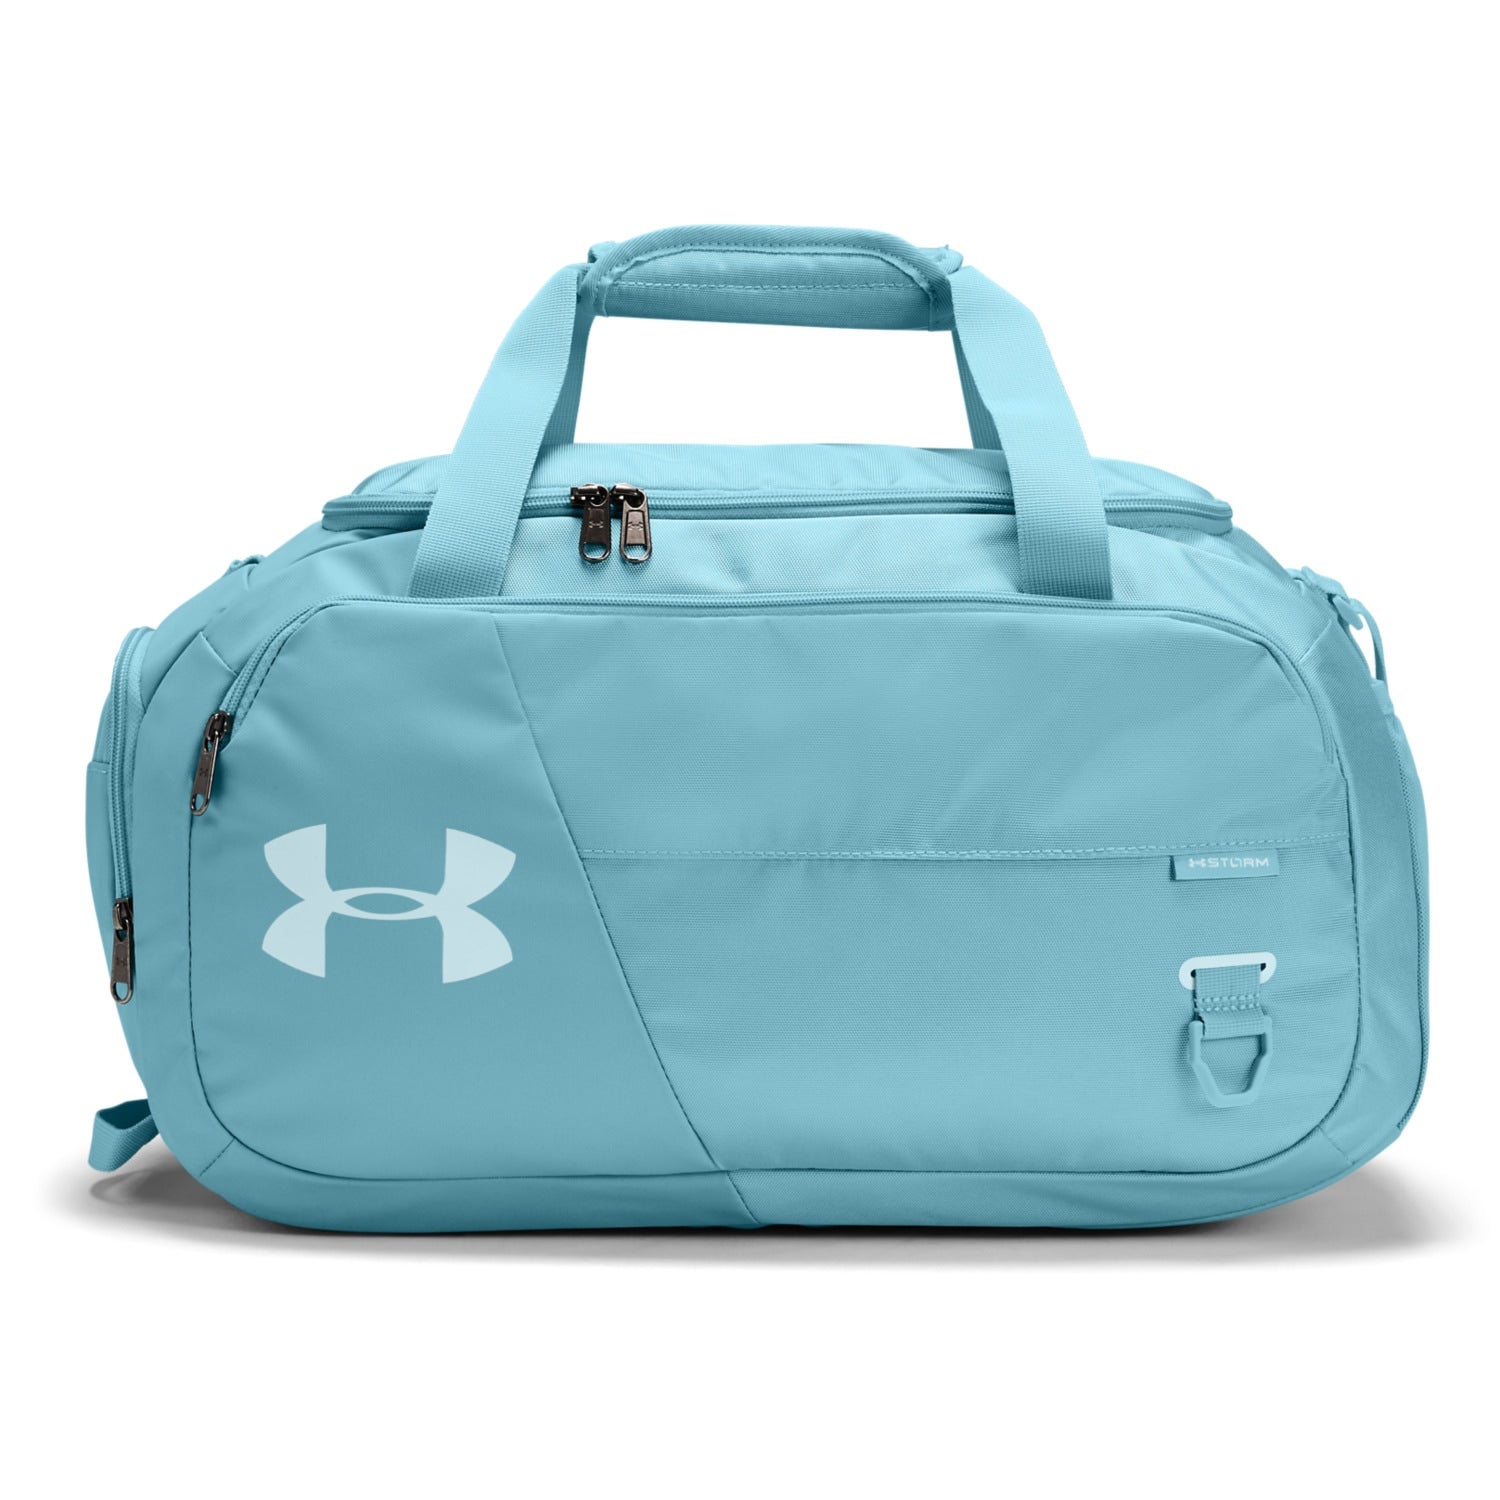 Under Armour + Undeniable 4.0 Extra Small Duffel Bag